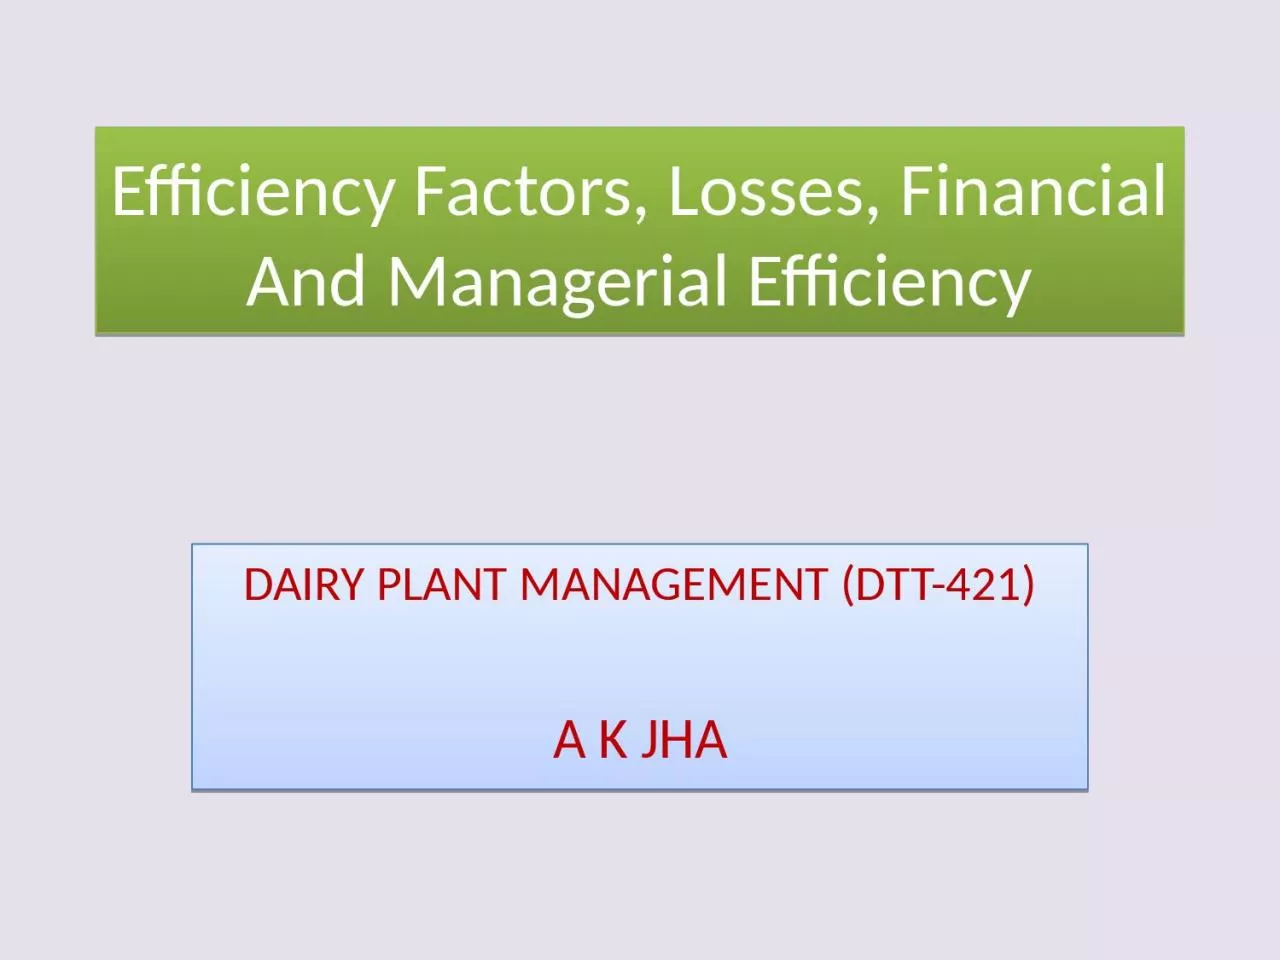 Efficiency Factors, Losses, Financial And Managerial Efficiency